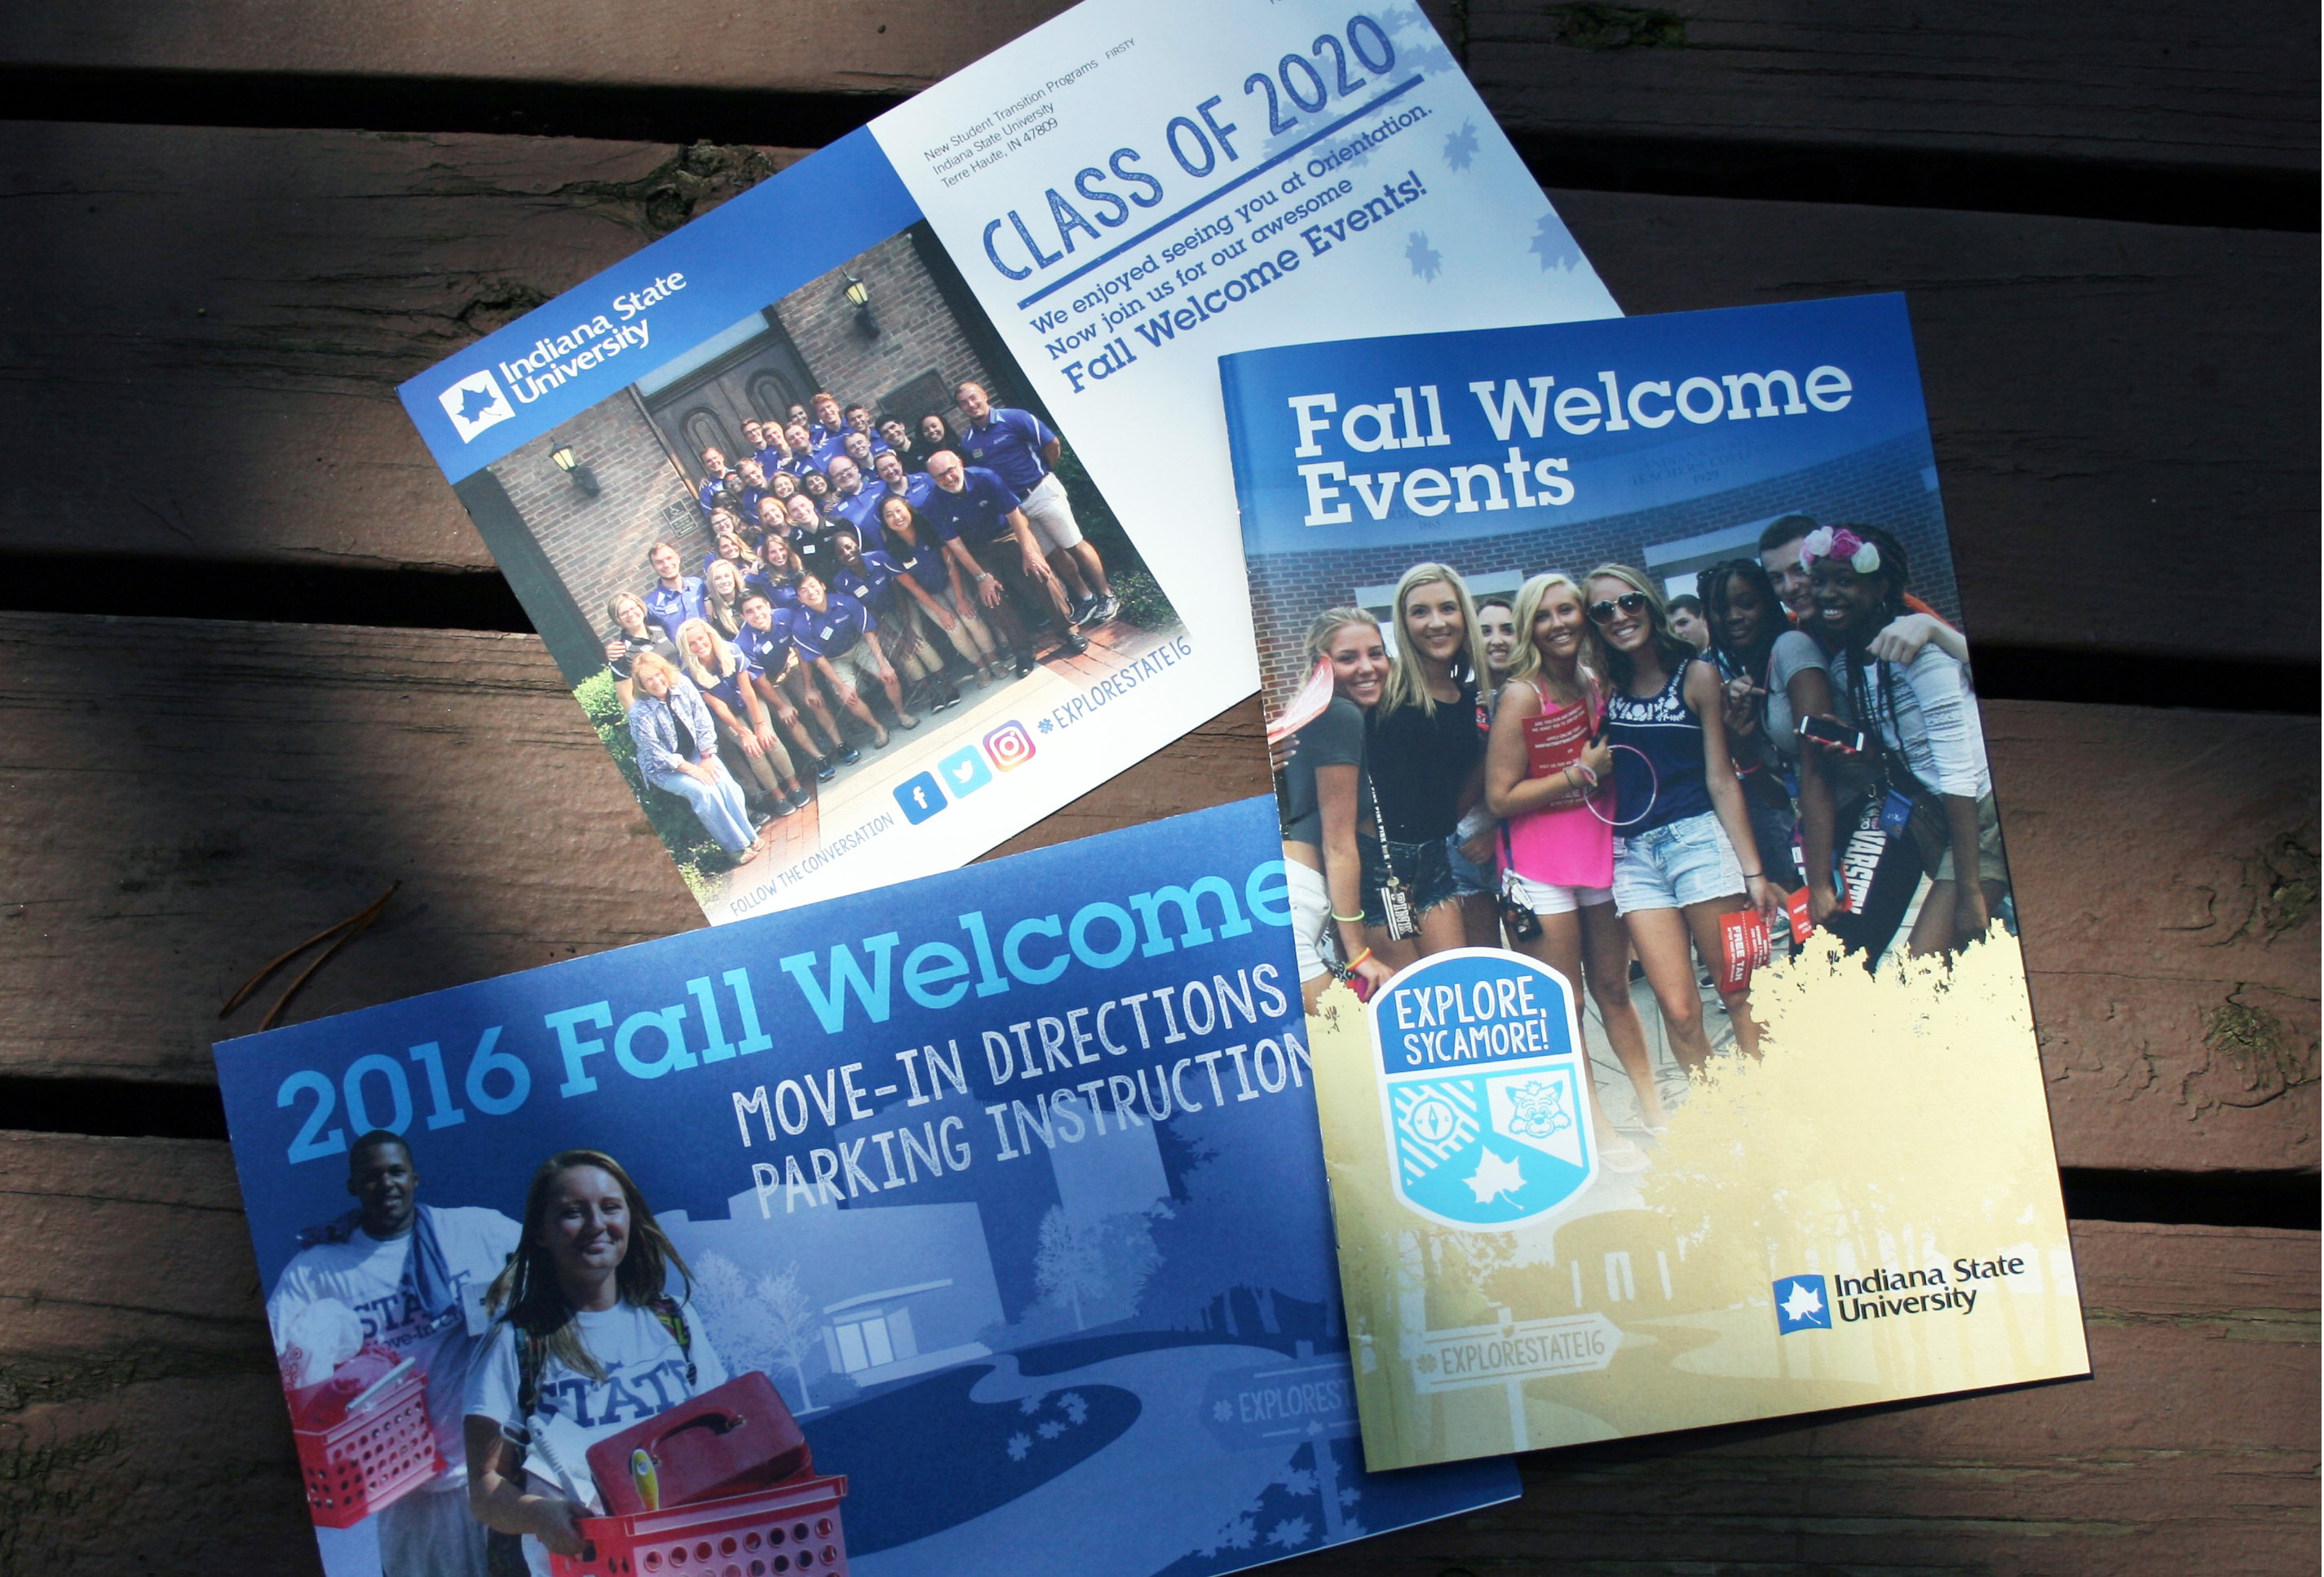 Indiana State University Fall Welcome materials